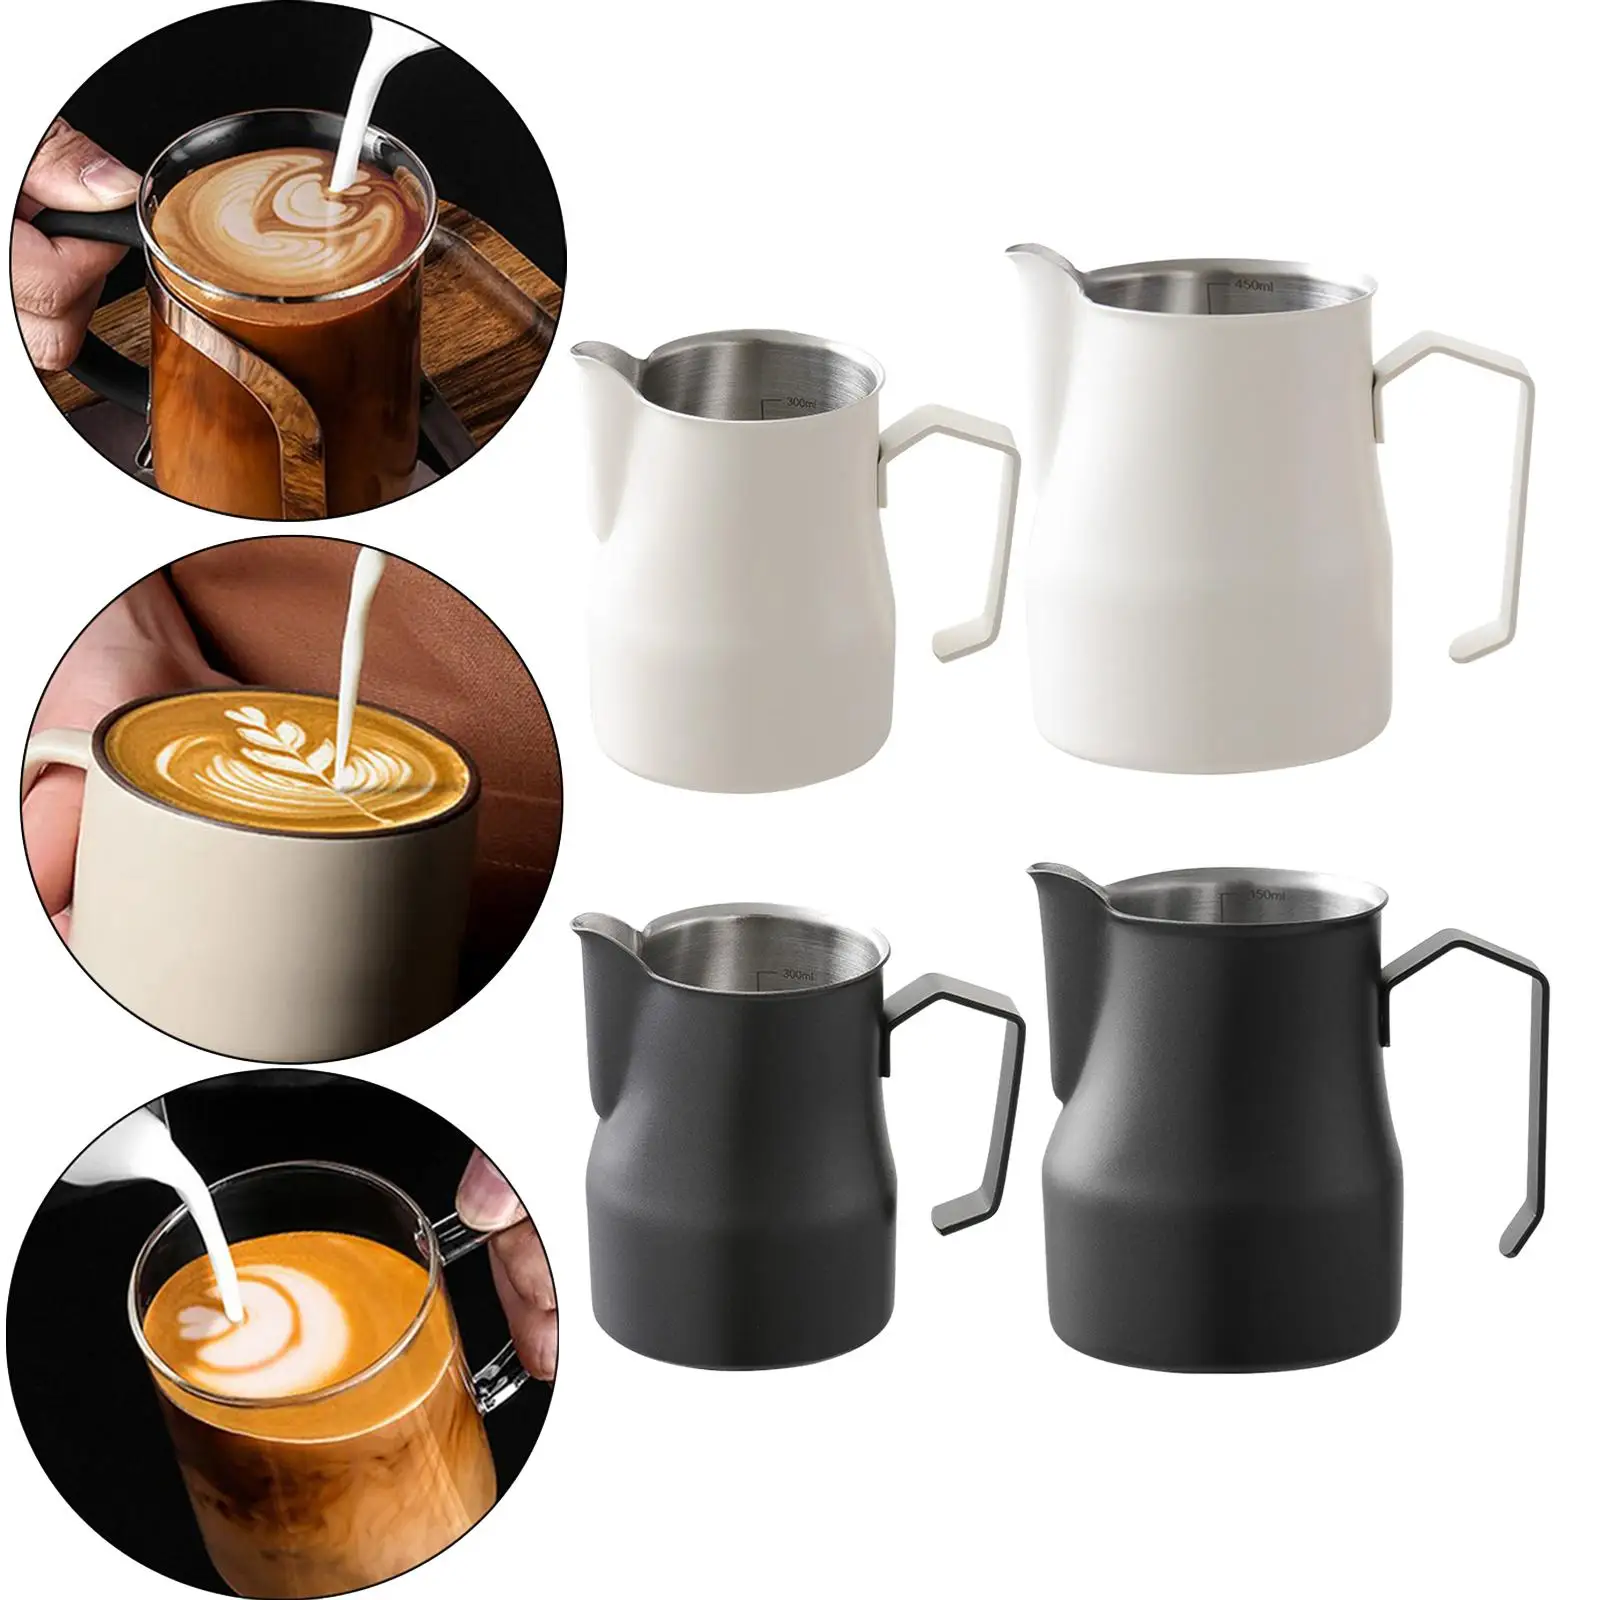 Milk Frothing Pitcher Jug Stainless Steel for Hot Chocolate Home Restaurant